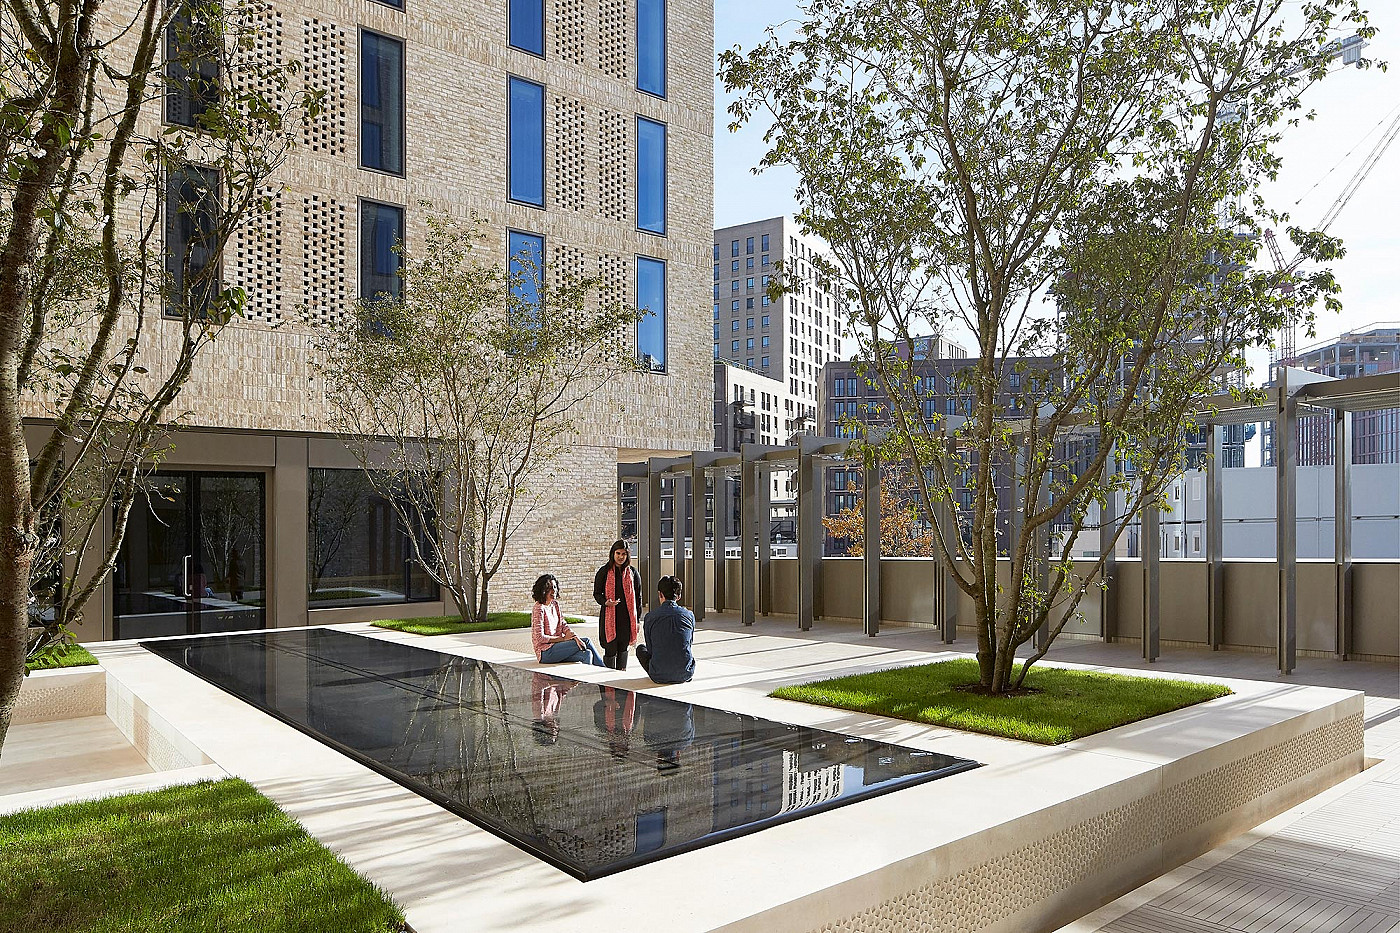 New Campus for University of the Arts London / Stanton Williams